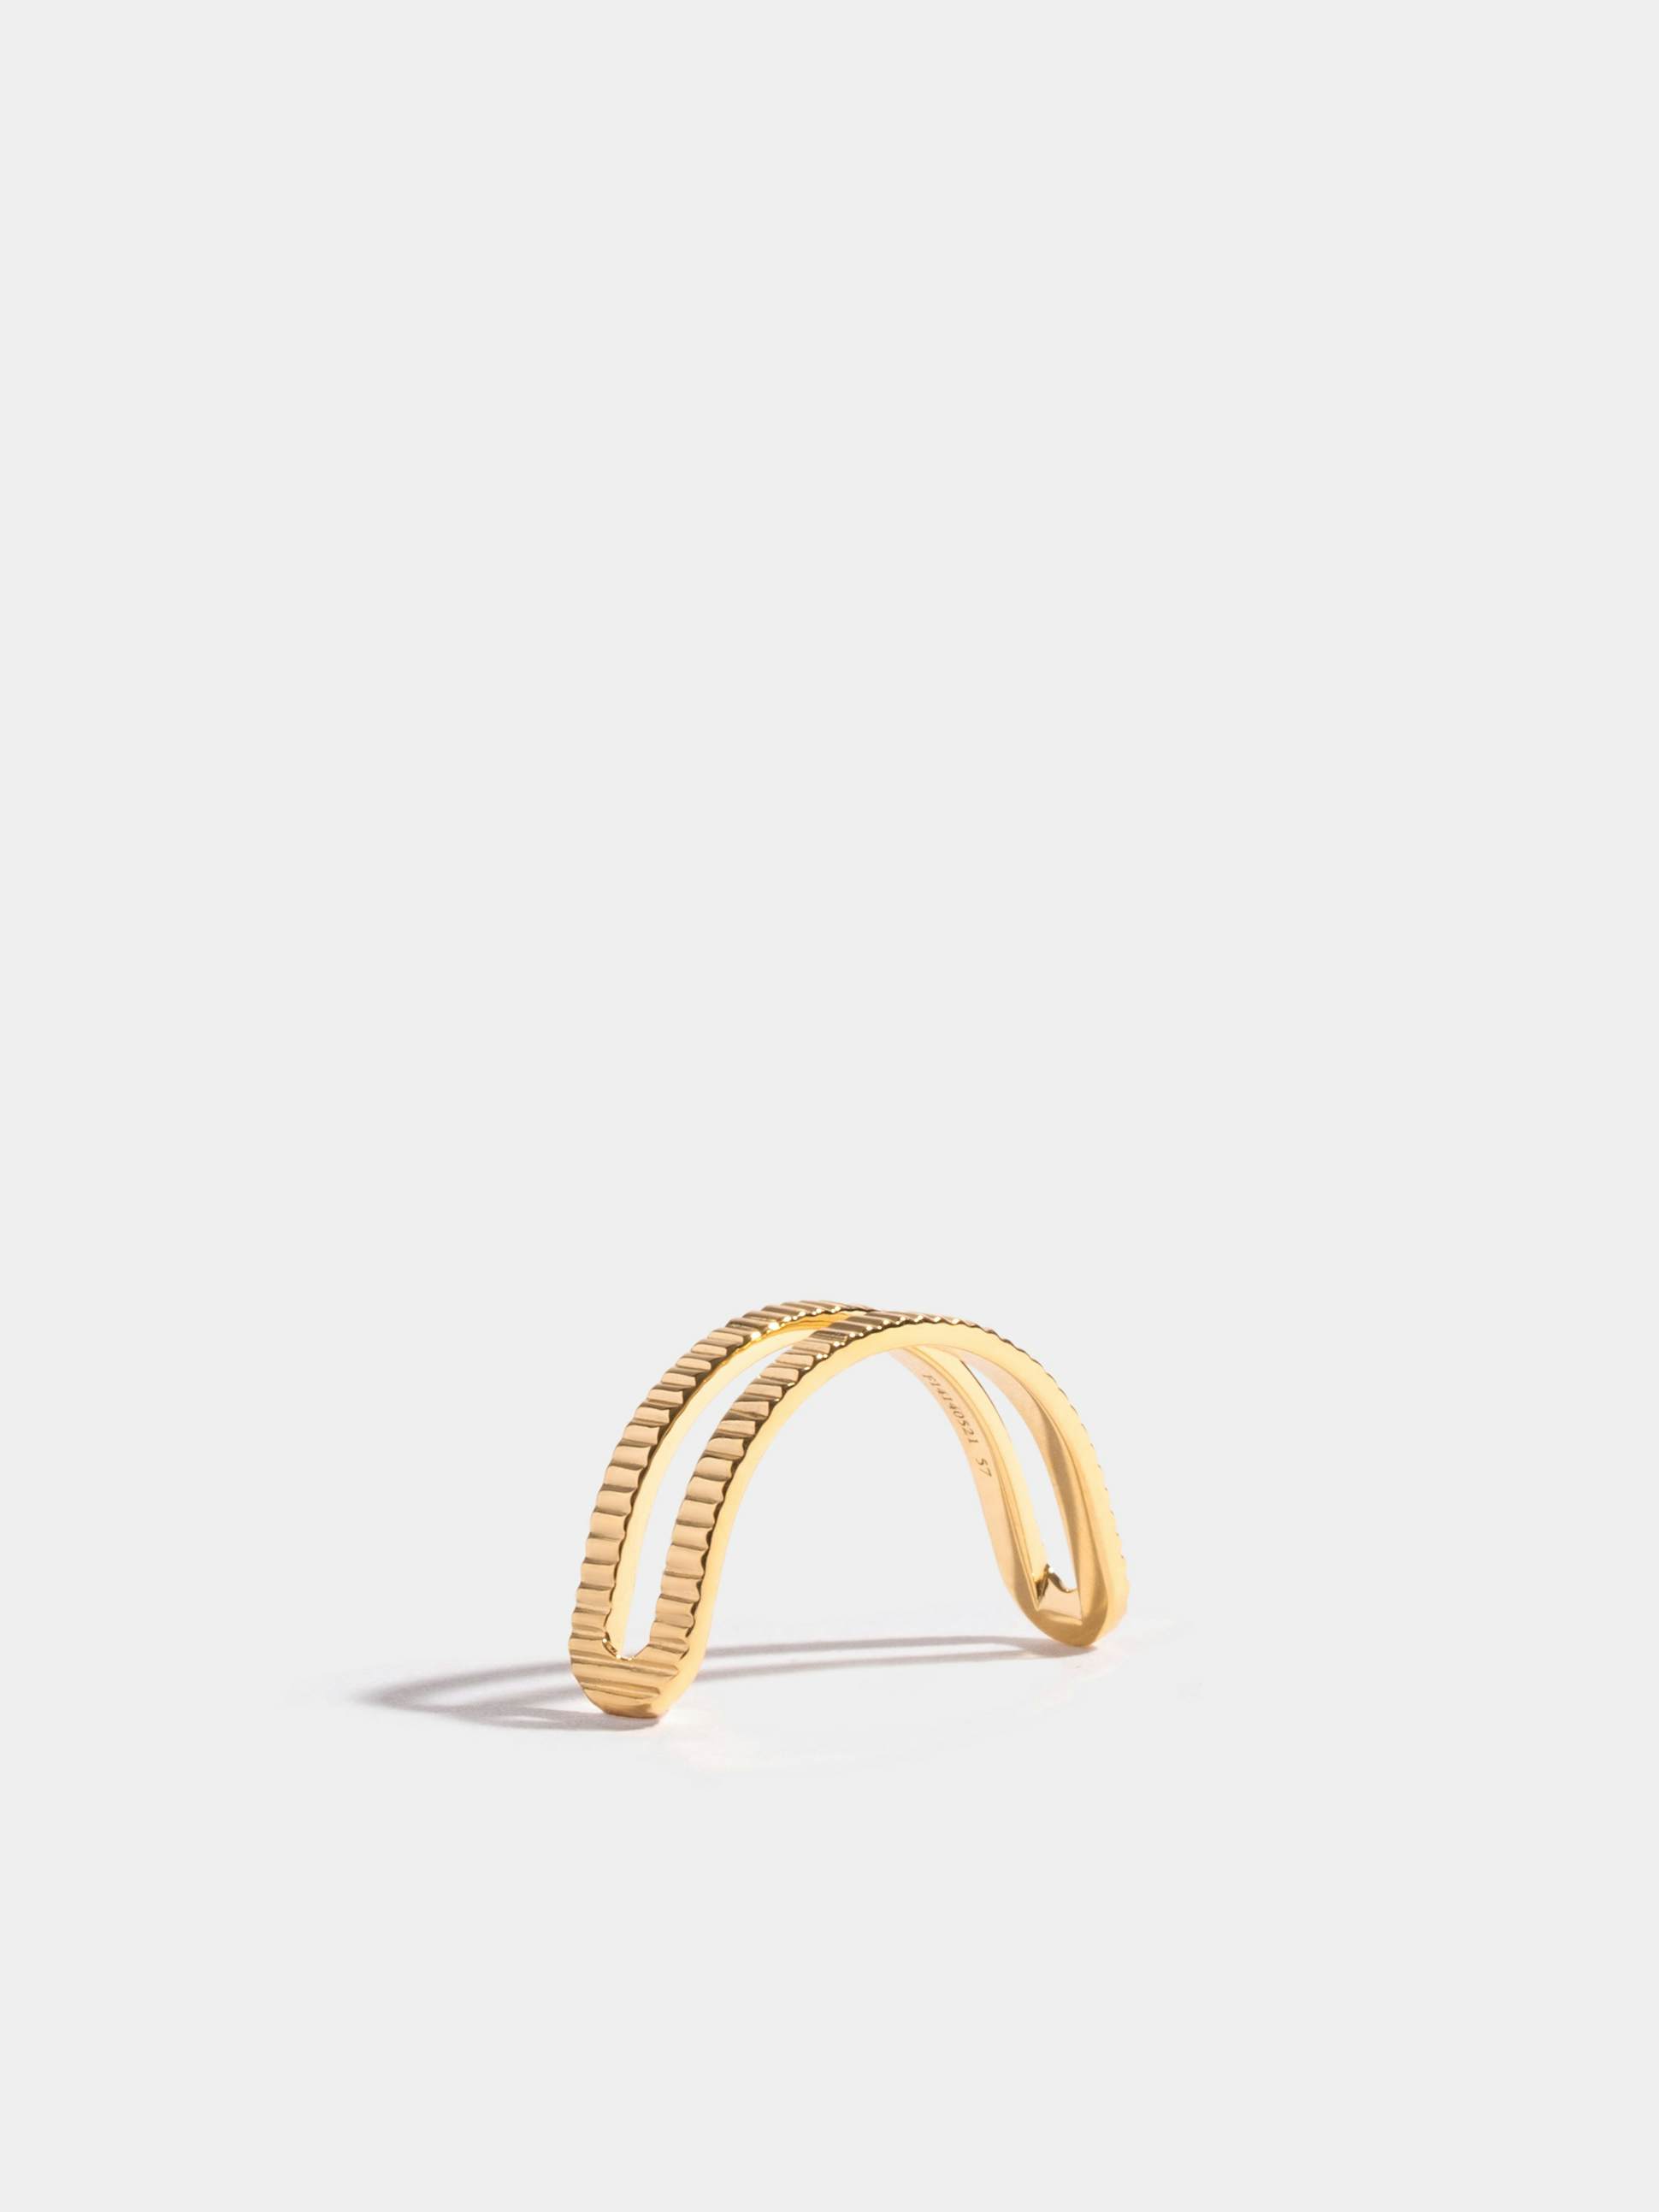 Étreintes simple half-ring in 18k Fairmined ethical yellow gold, with ridges finish.